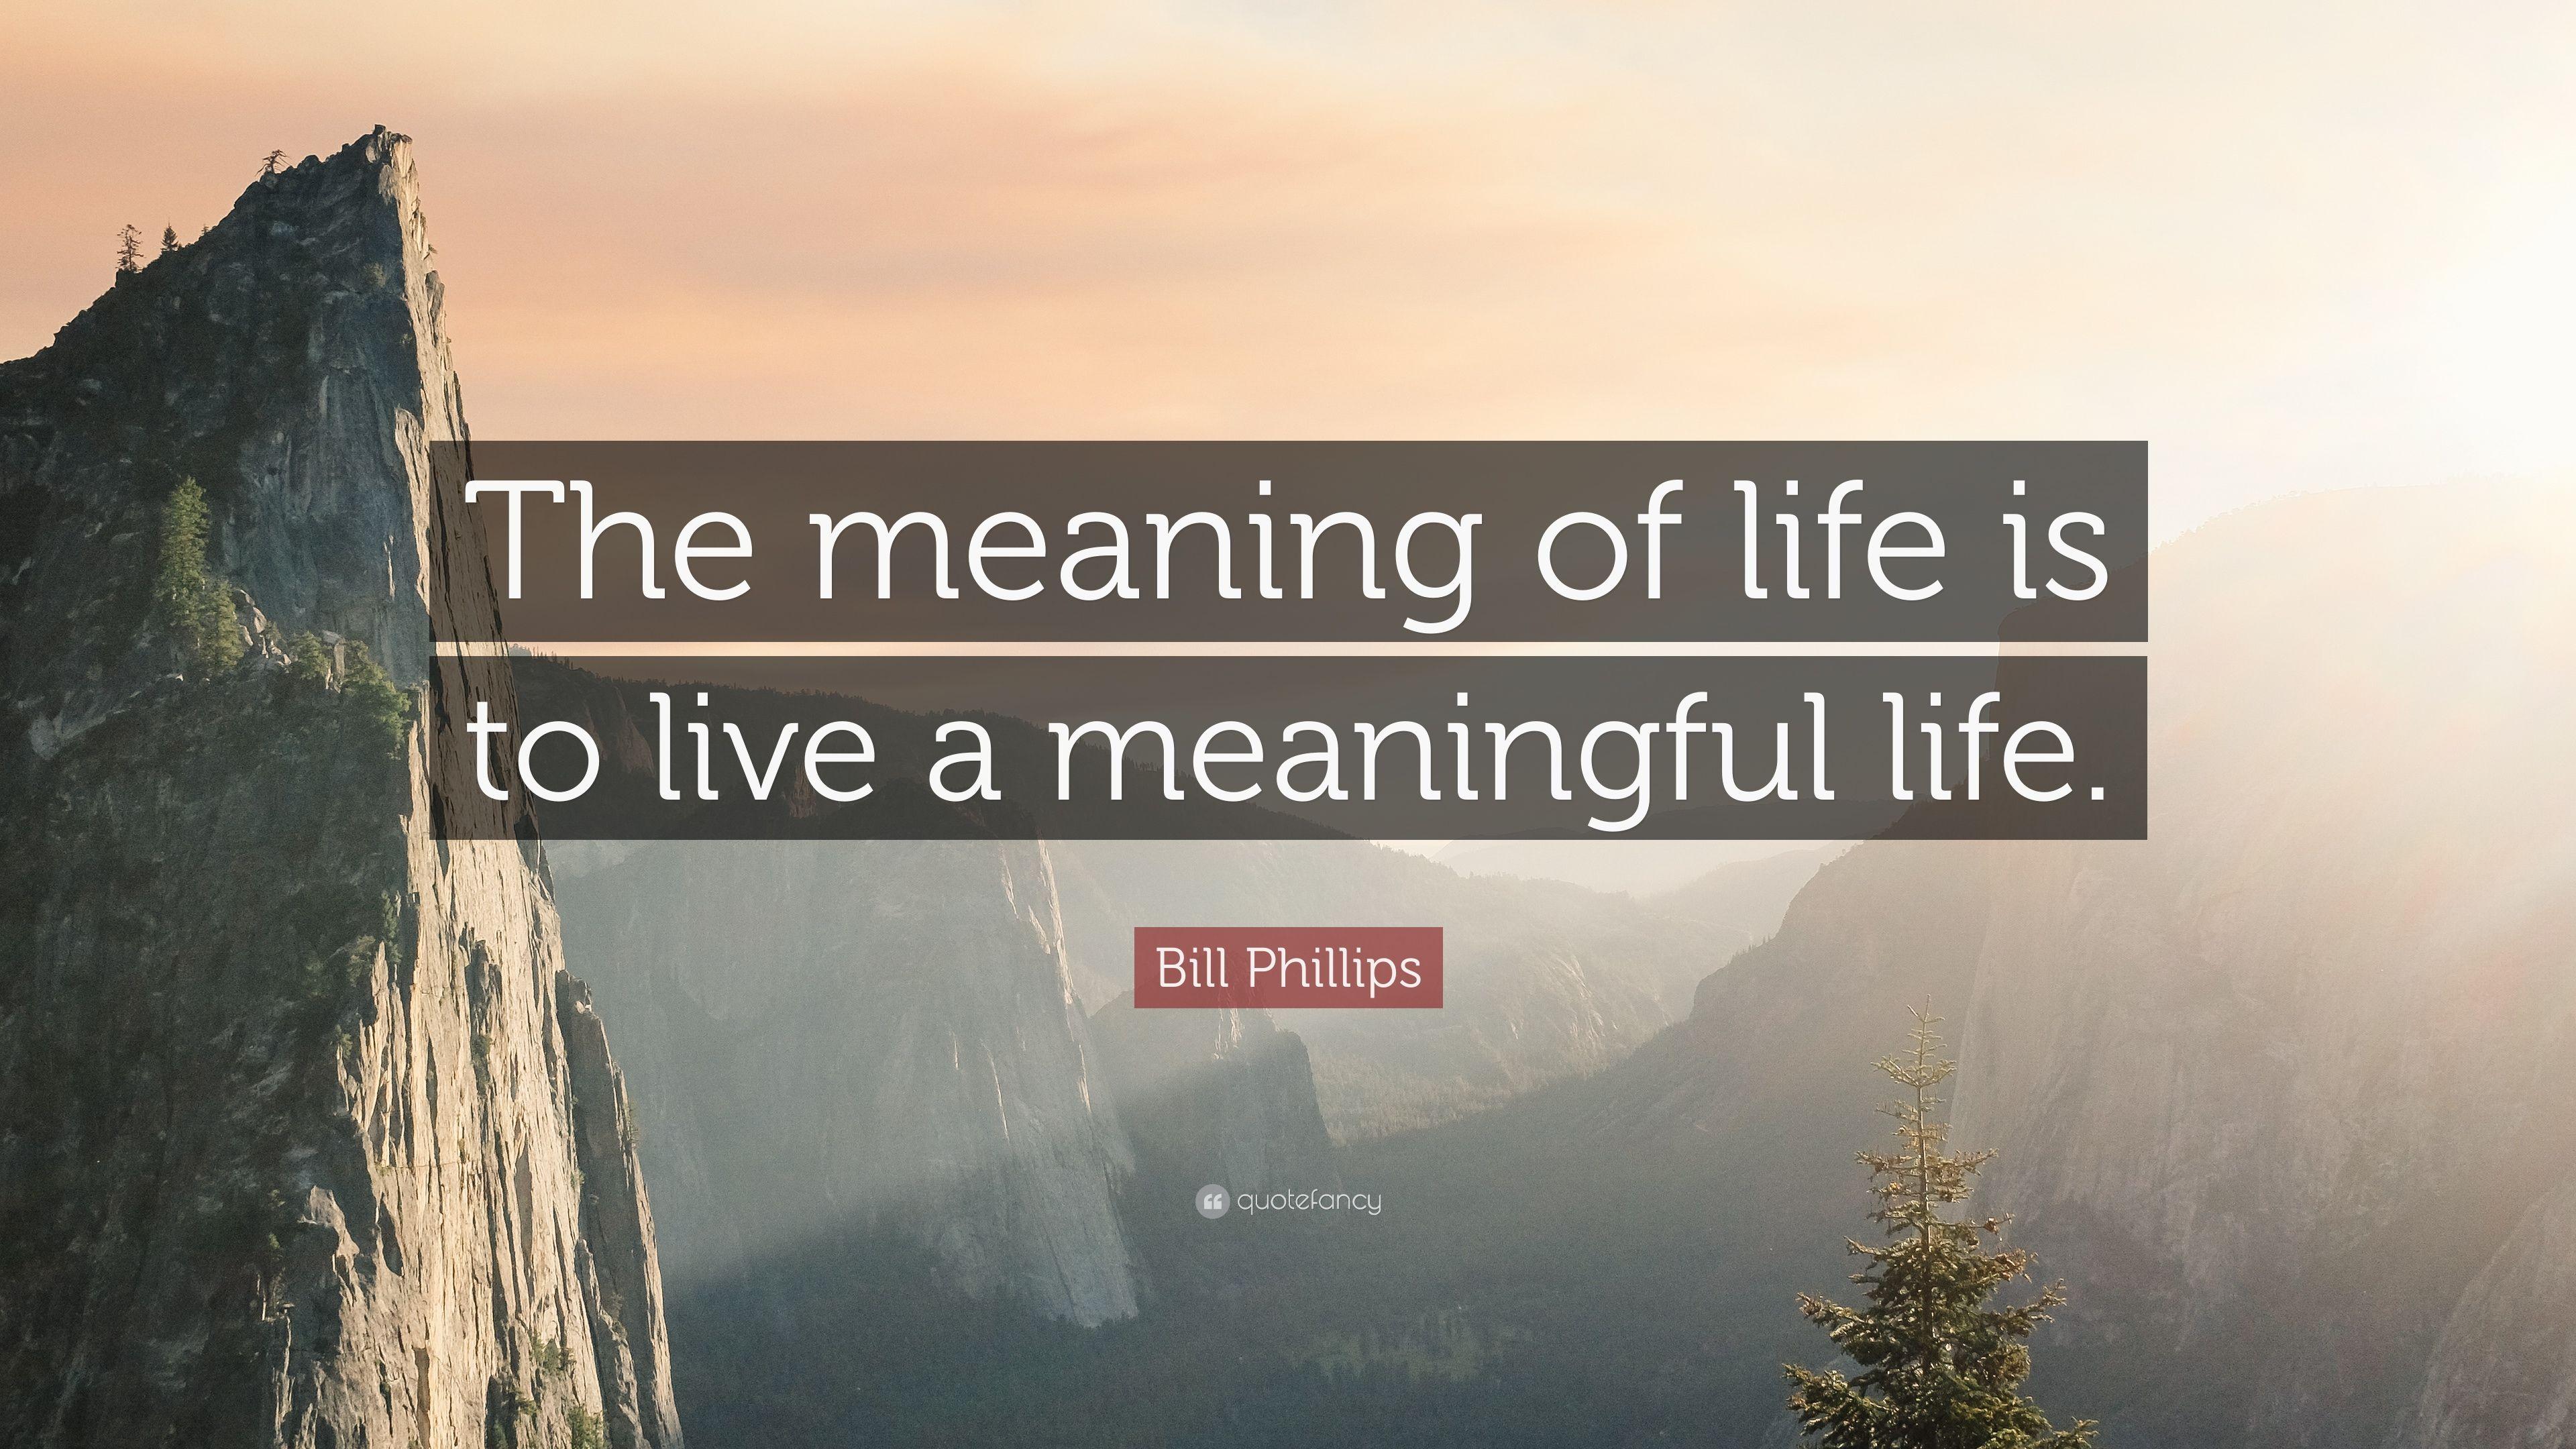 Bill Phillips Quote: “The meaning of life is to live a meaningful